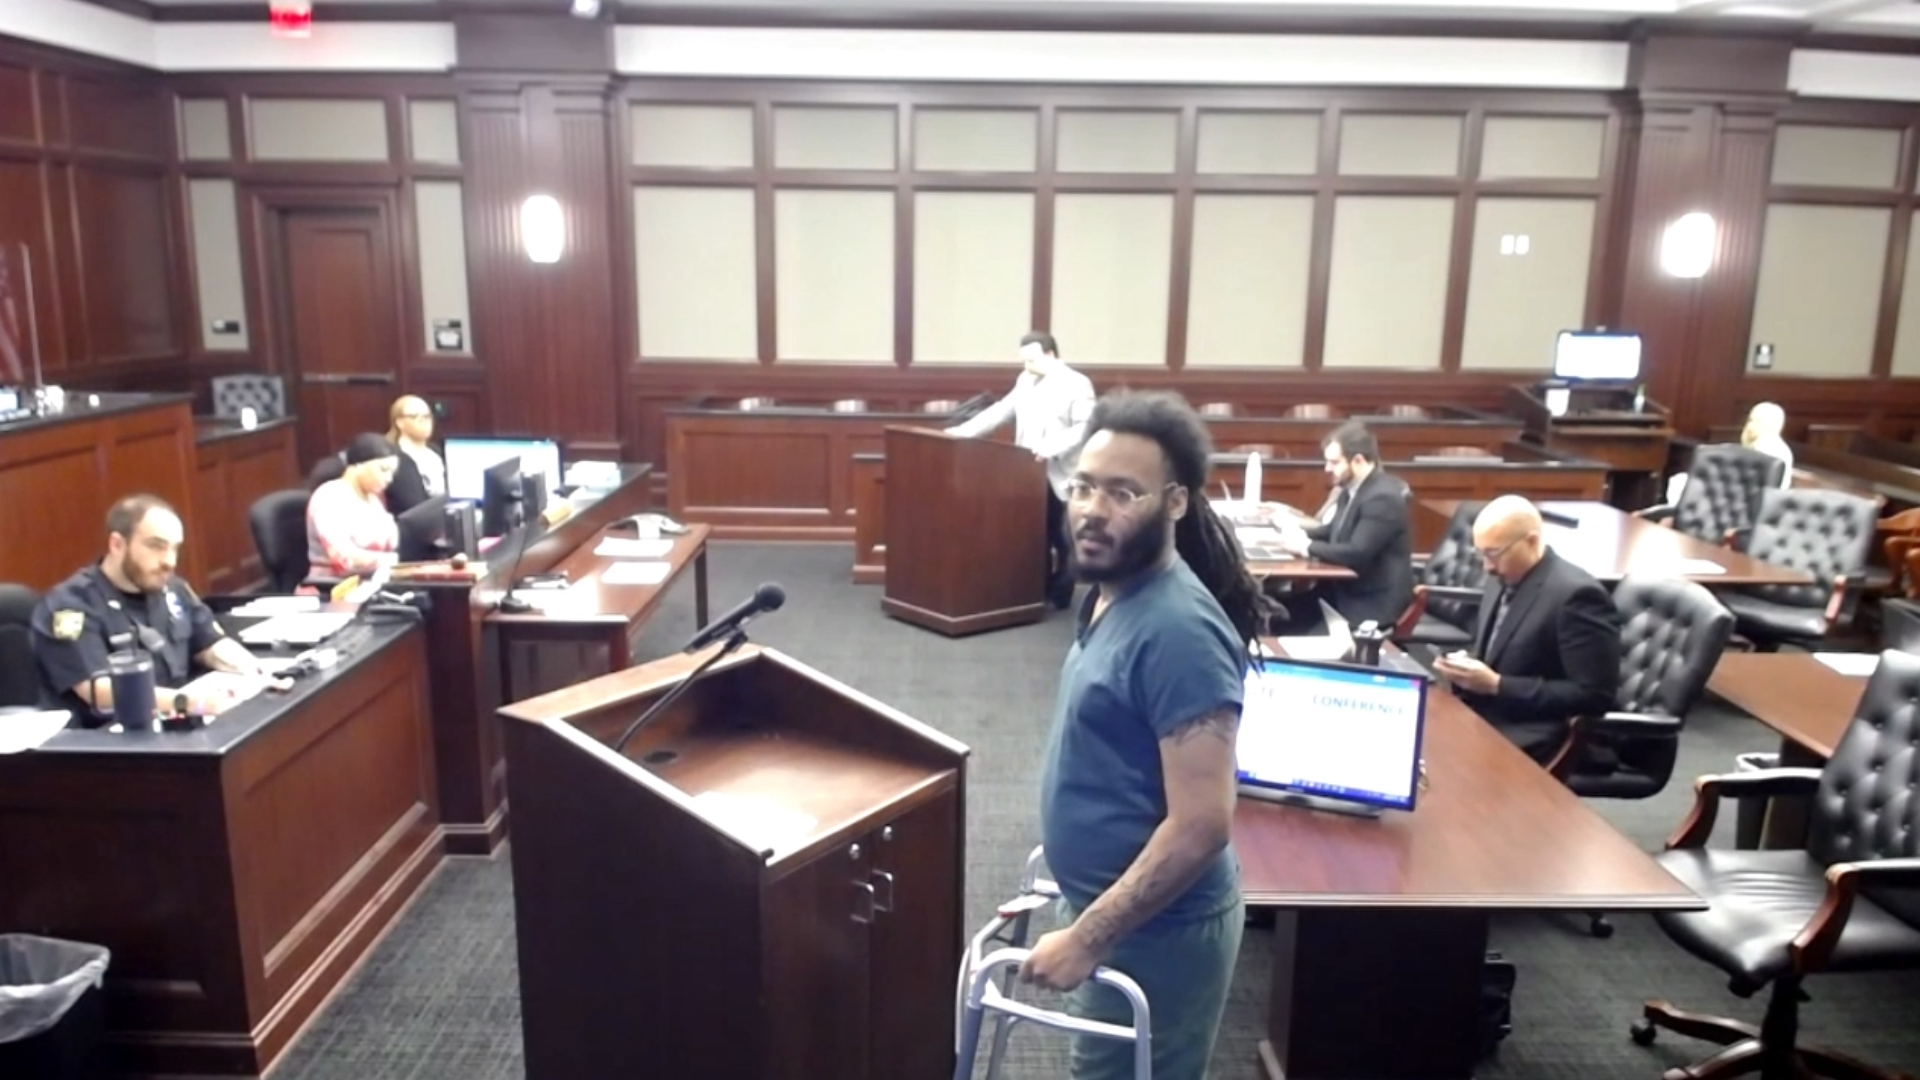 Abdul Robinson Jr., the brother of Jacksonville rapper Ksoo, appeared in Duval Co. court Thursday, as he and his brother are charged in Charles McCormick's murder.